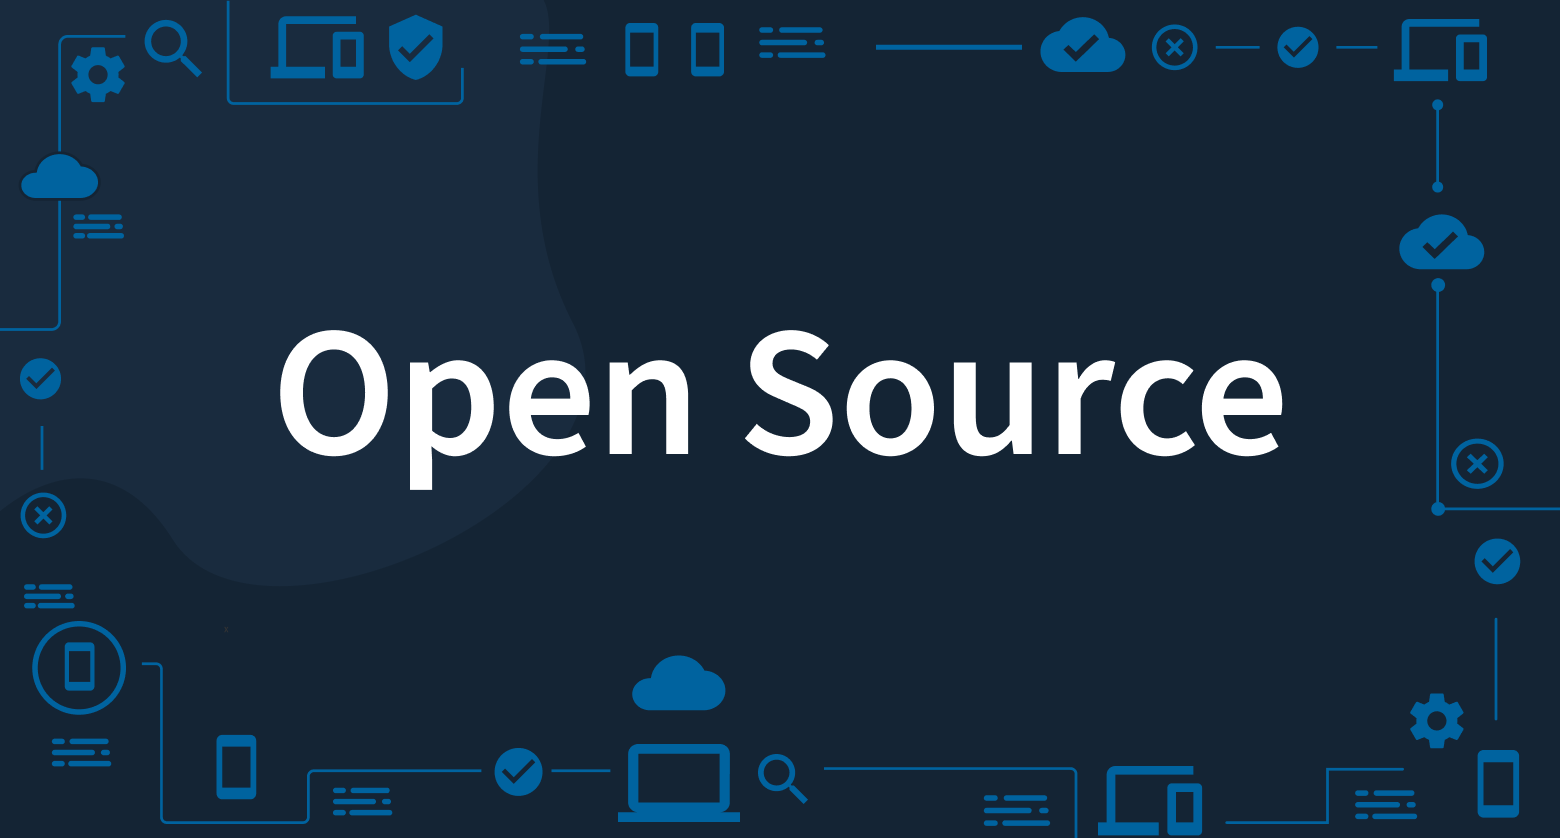 Open Source at BrowserStack